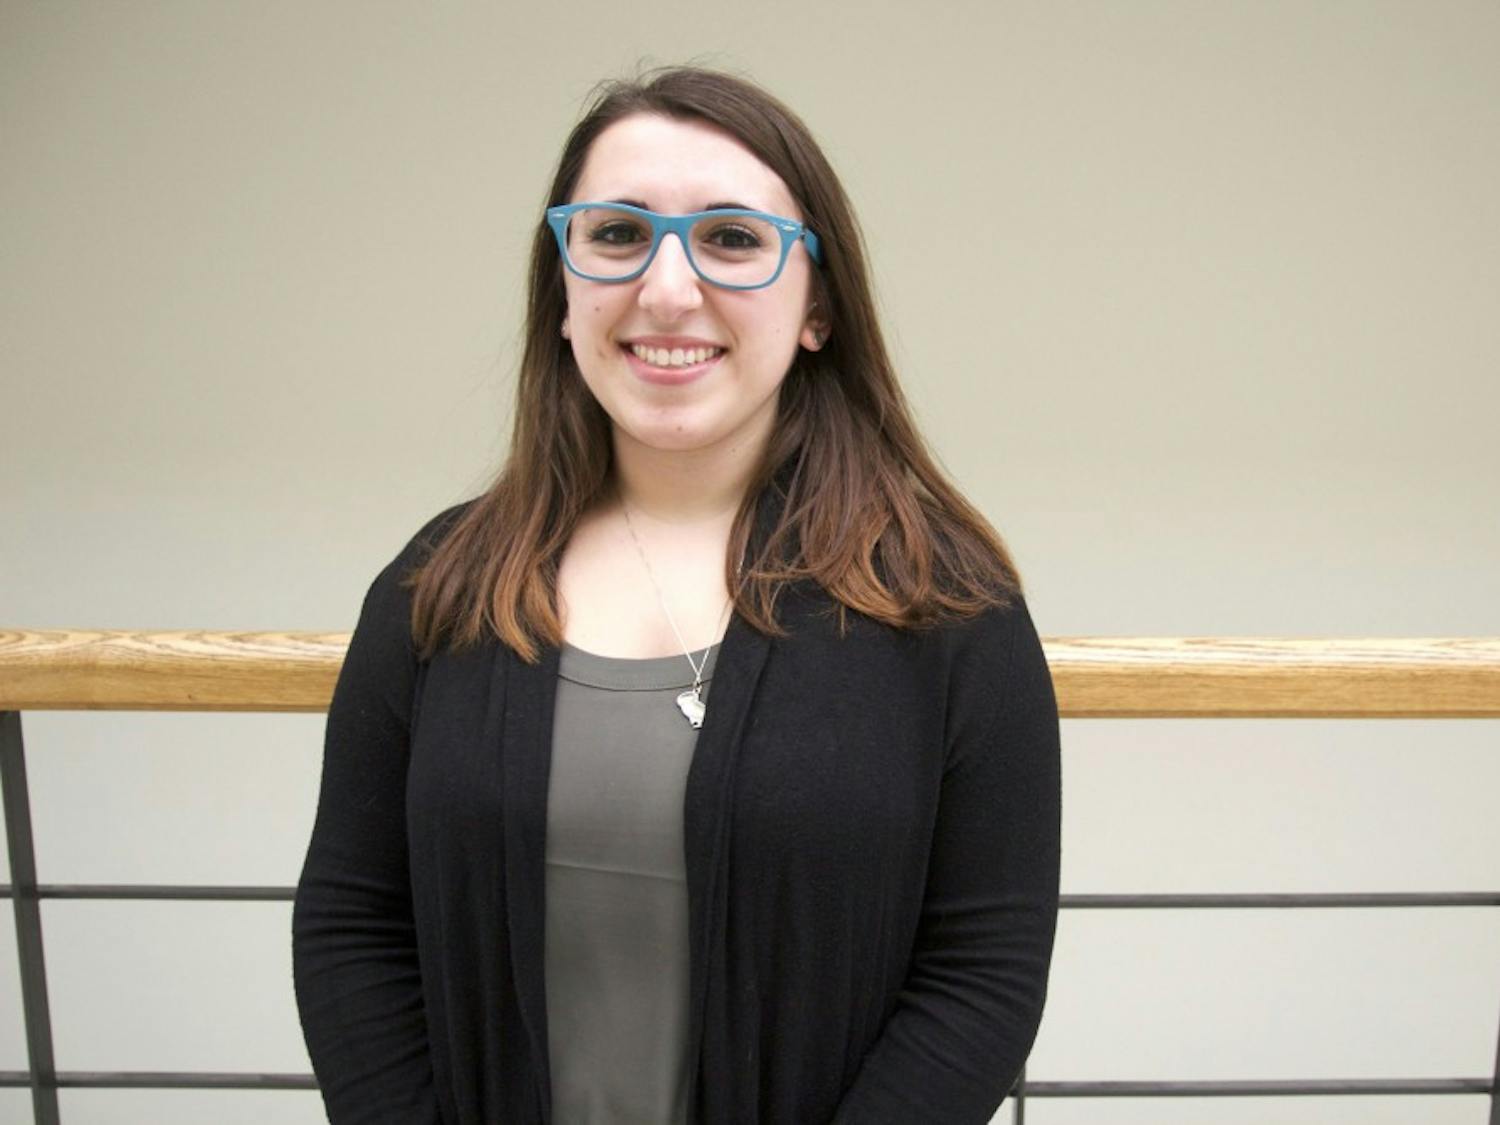 Students with high academic achievement and involvement in the Class of 2016 are being recognized as the “Outstanding Senior” in their department. Ashley Cercone (pictured), a senior anthropology and classics major received the award in the anthropology department.